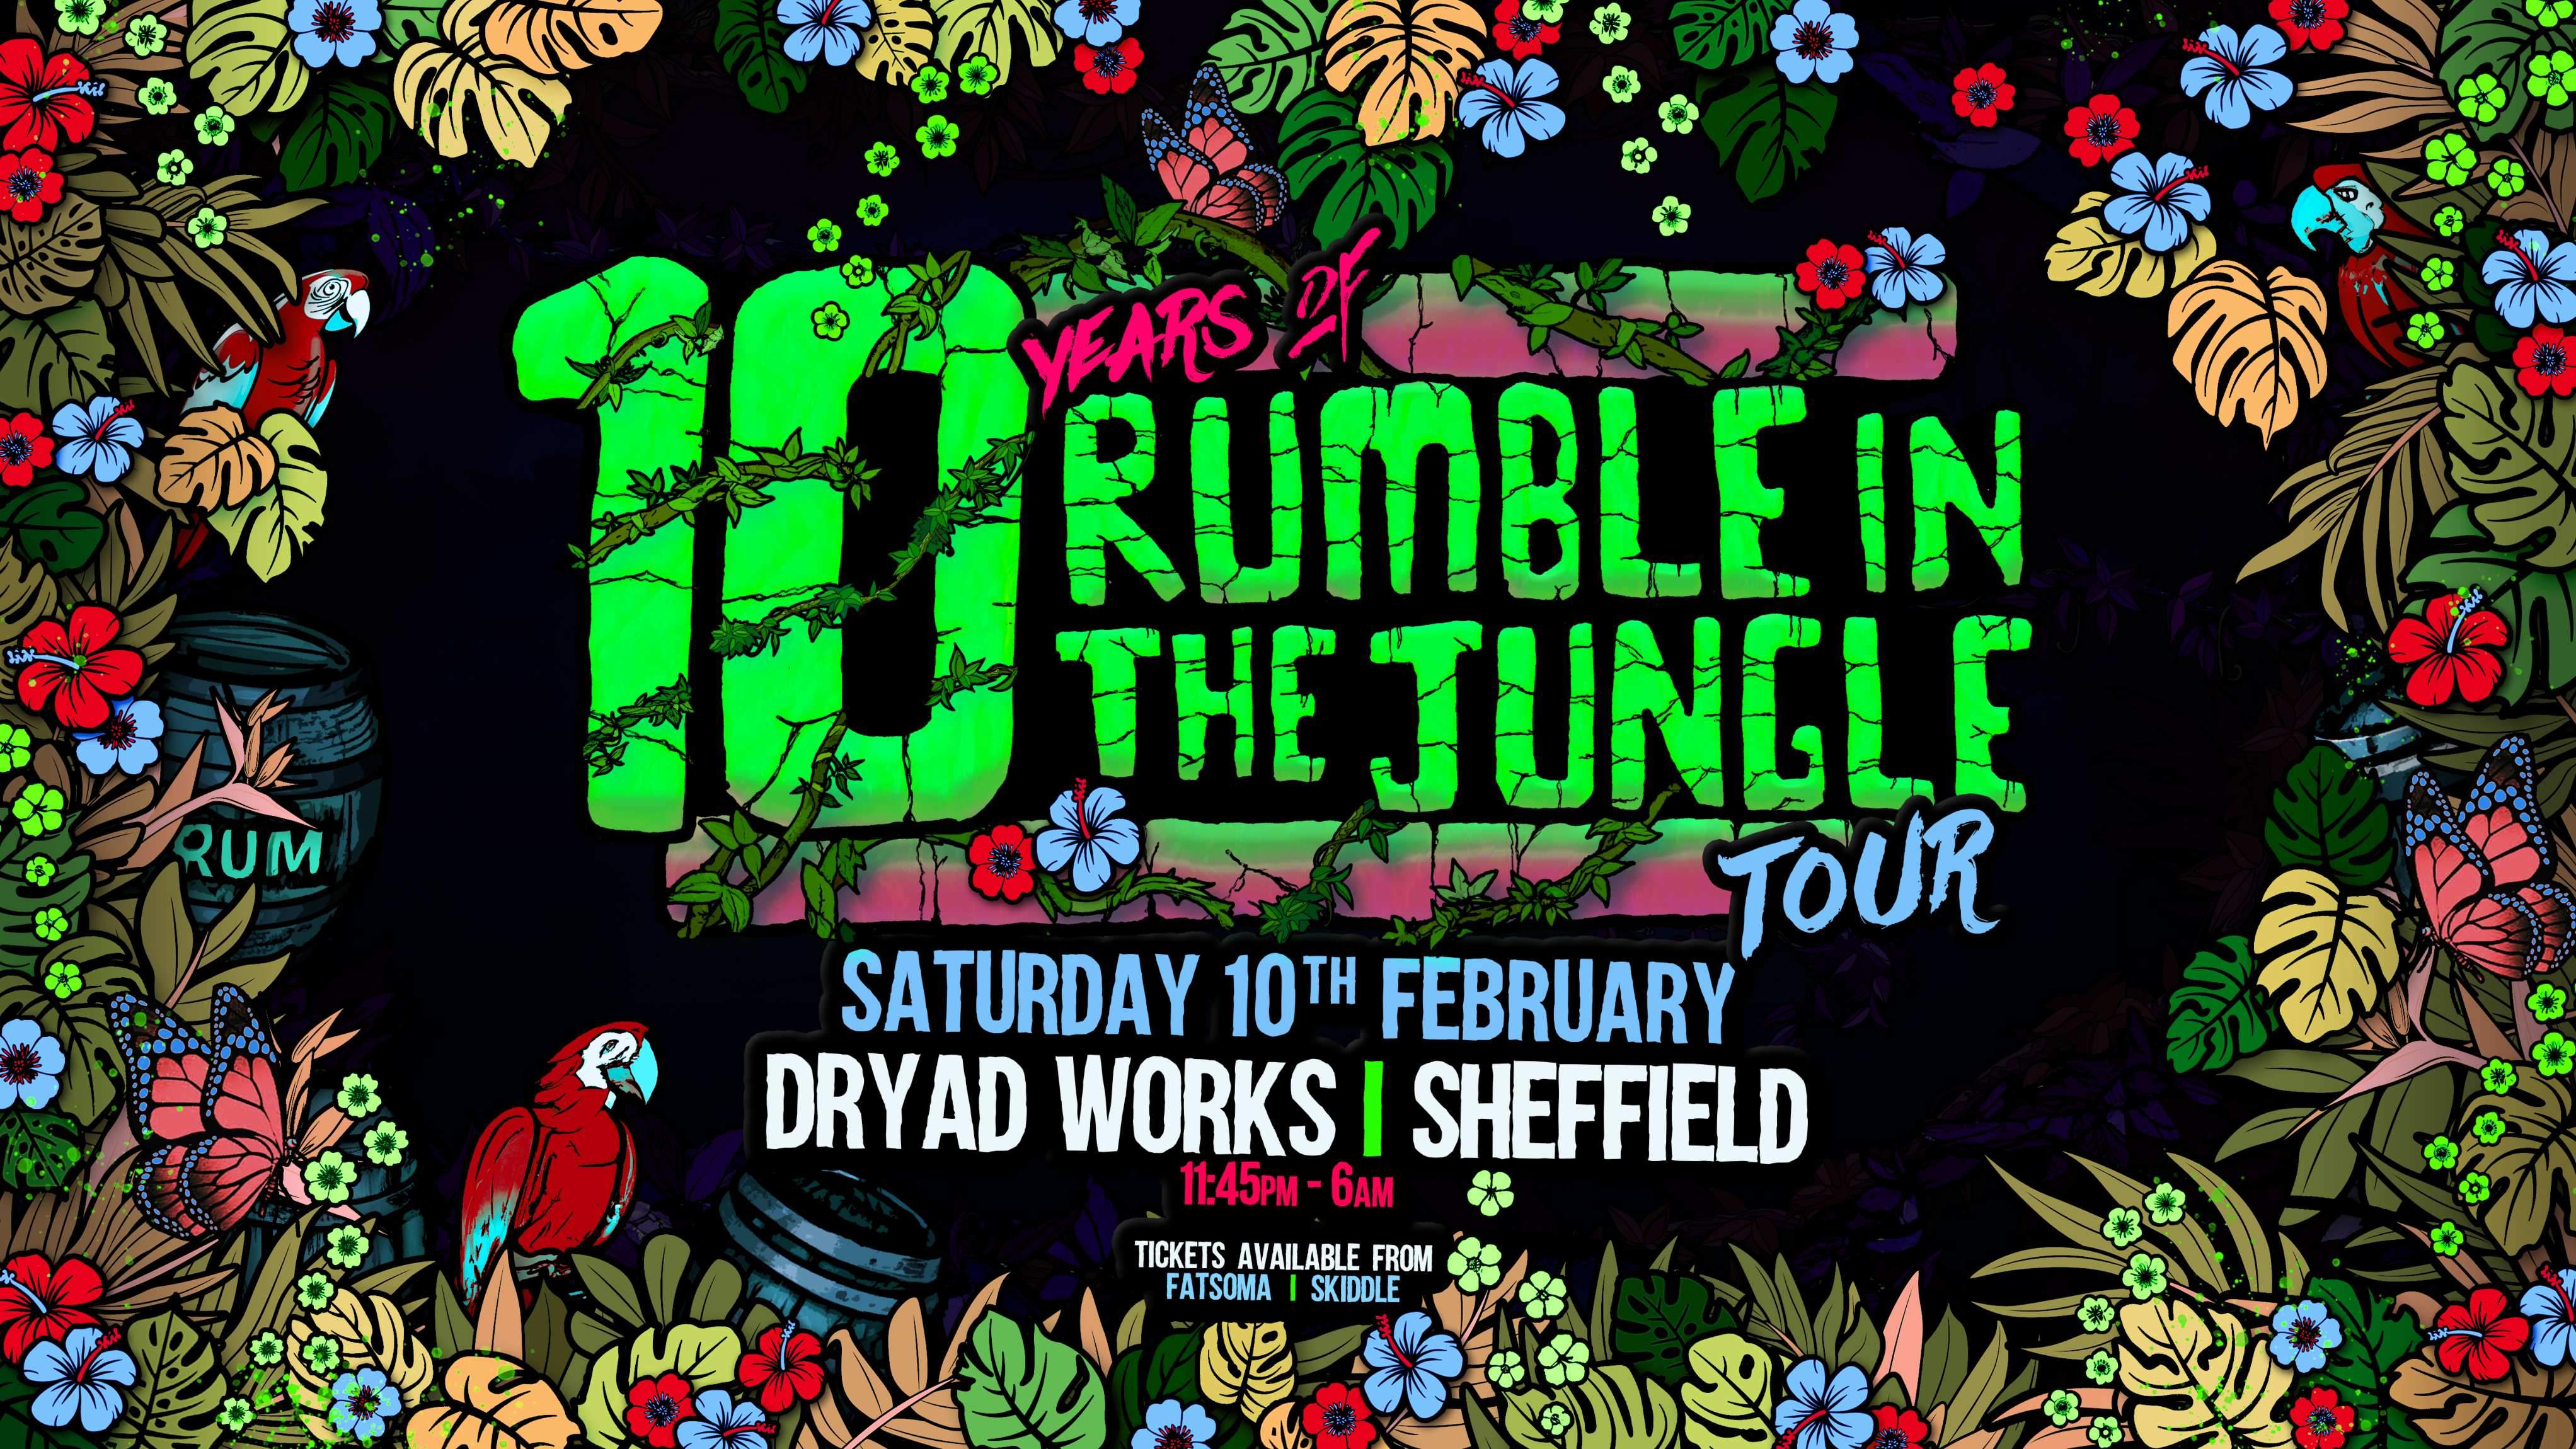 10 YEARS OF RUMBLE - SHEFFIELD - フライヤー表